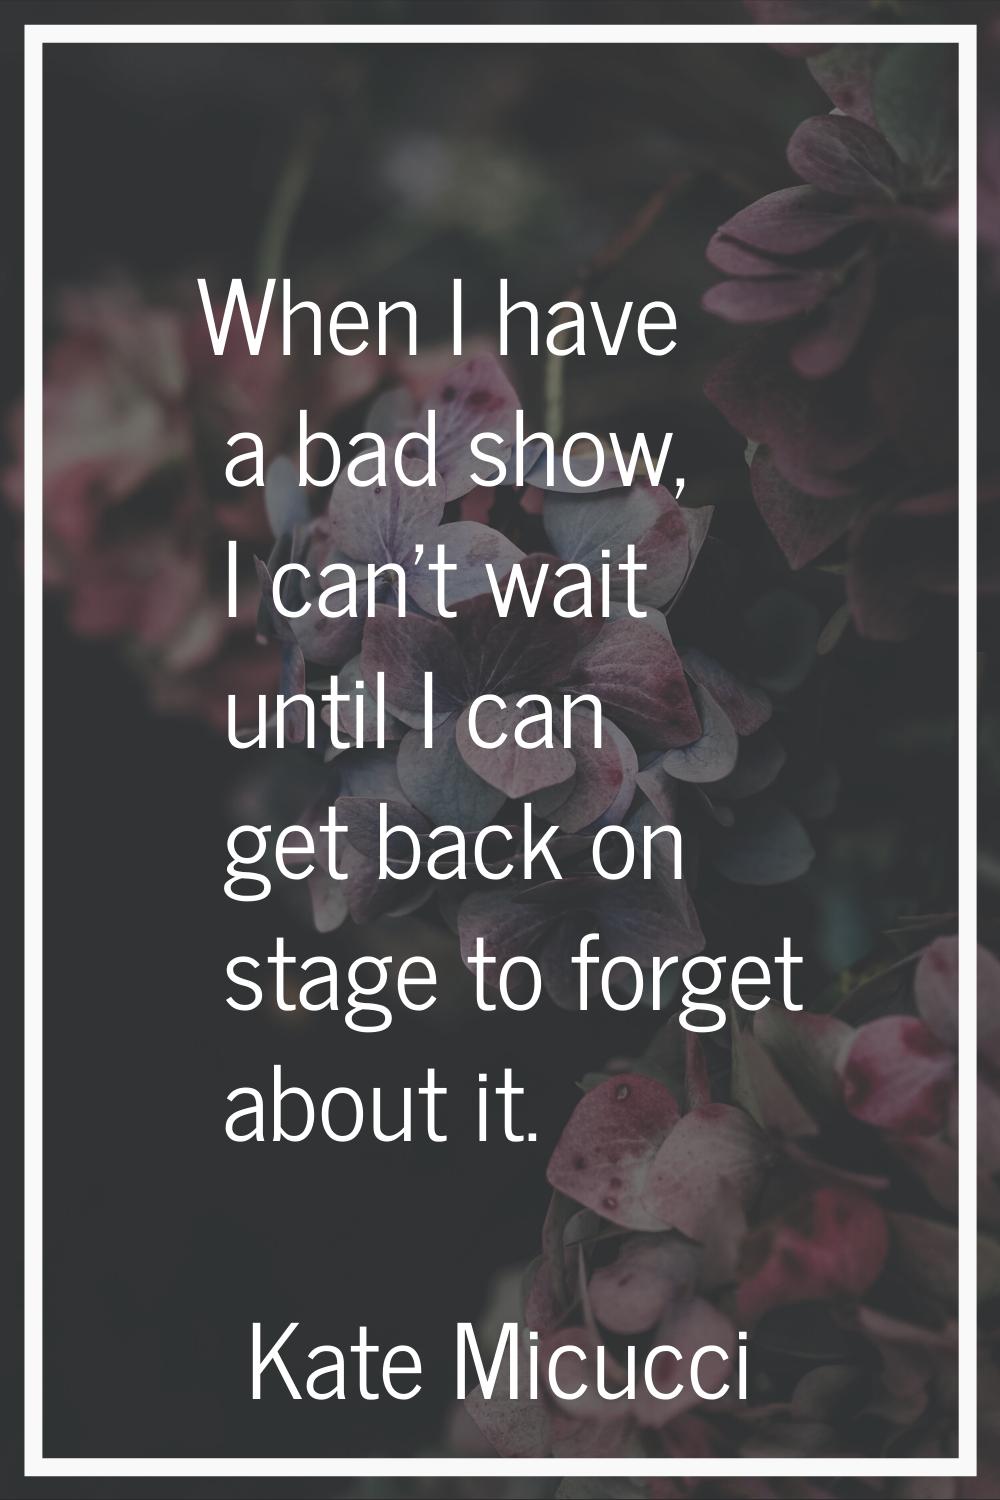 When I have a bad show, I can't wait until I can get back on stage to forget about it.